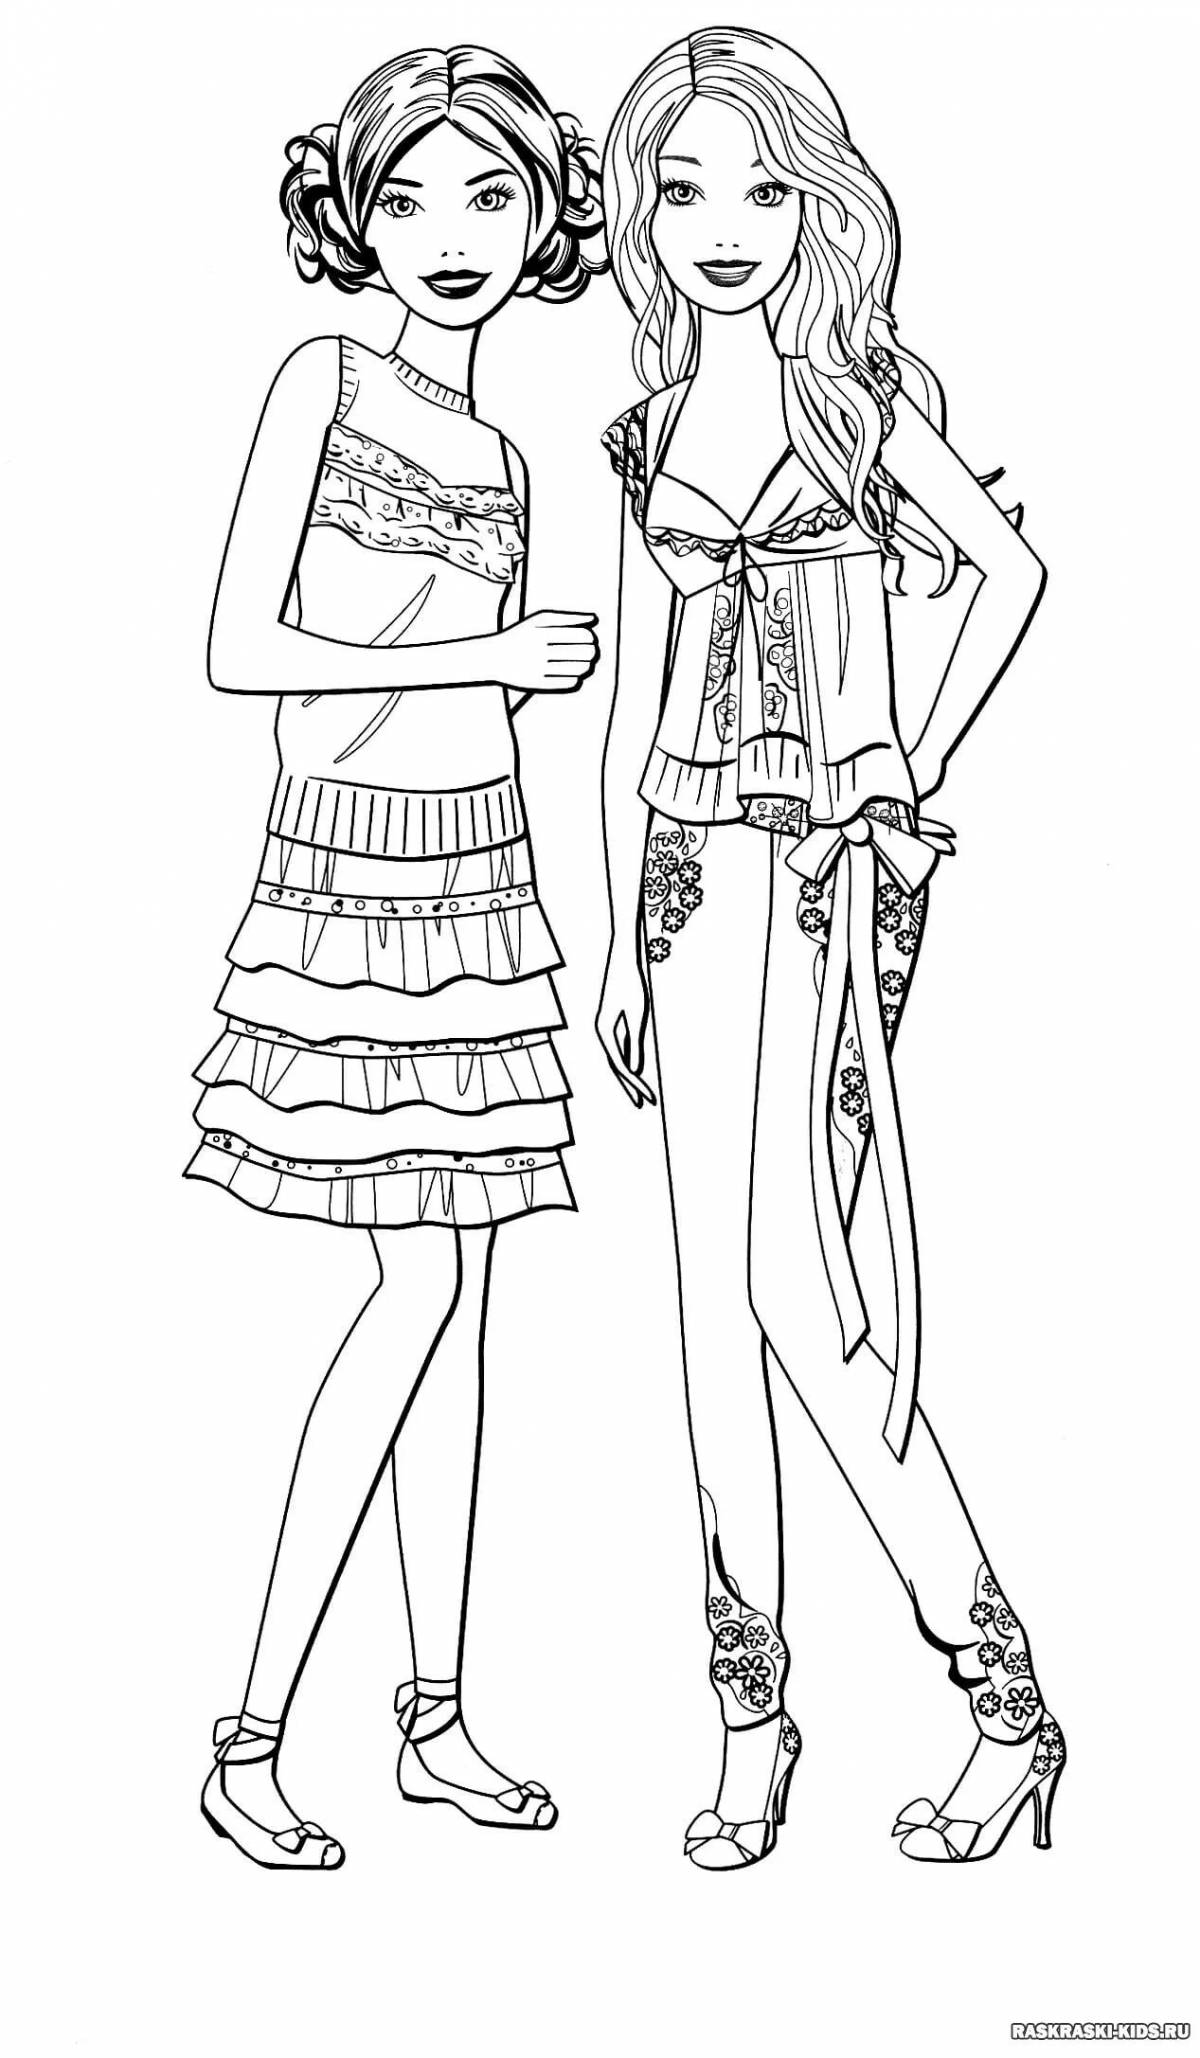 Coloring pages, fashionable for children